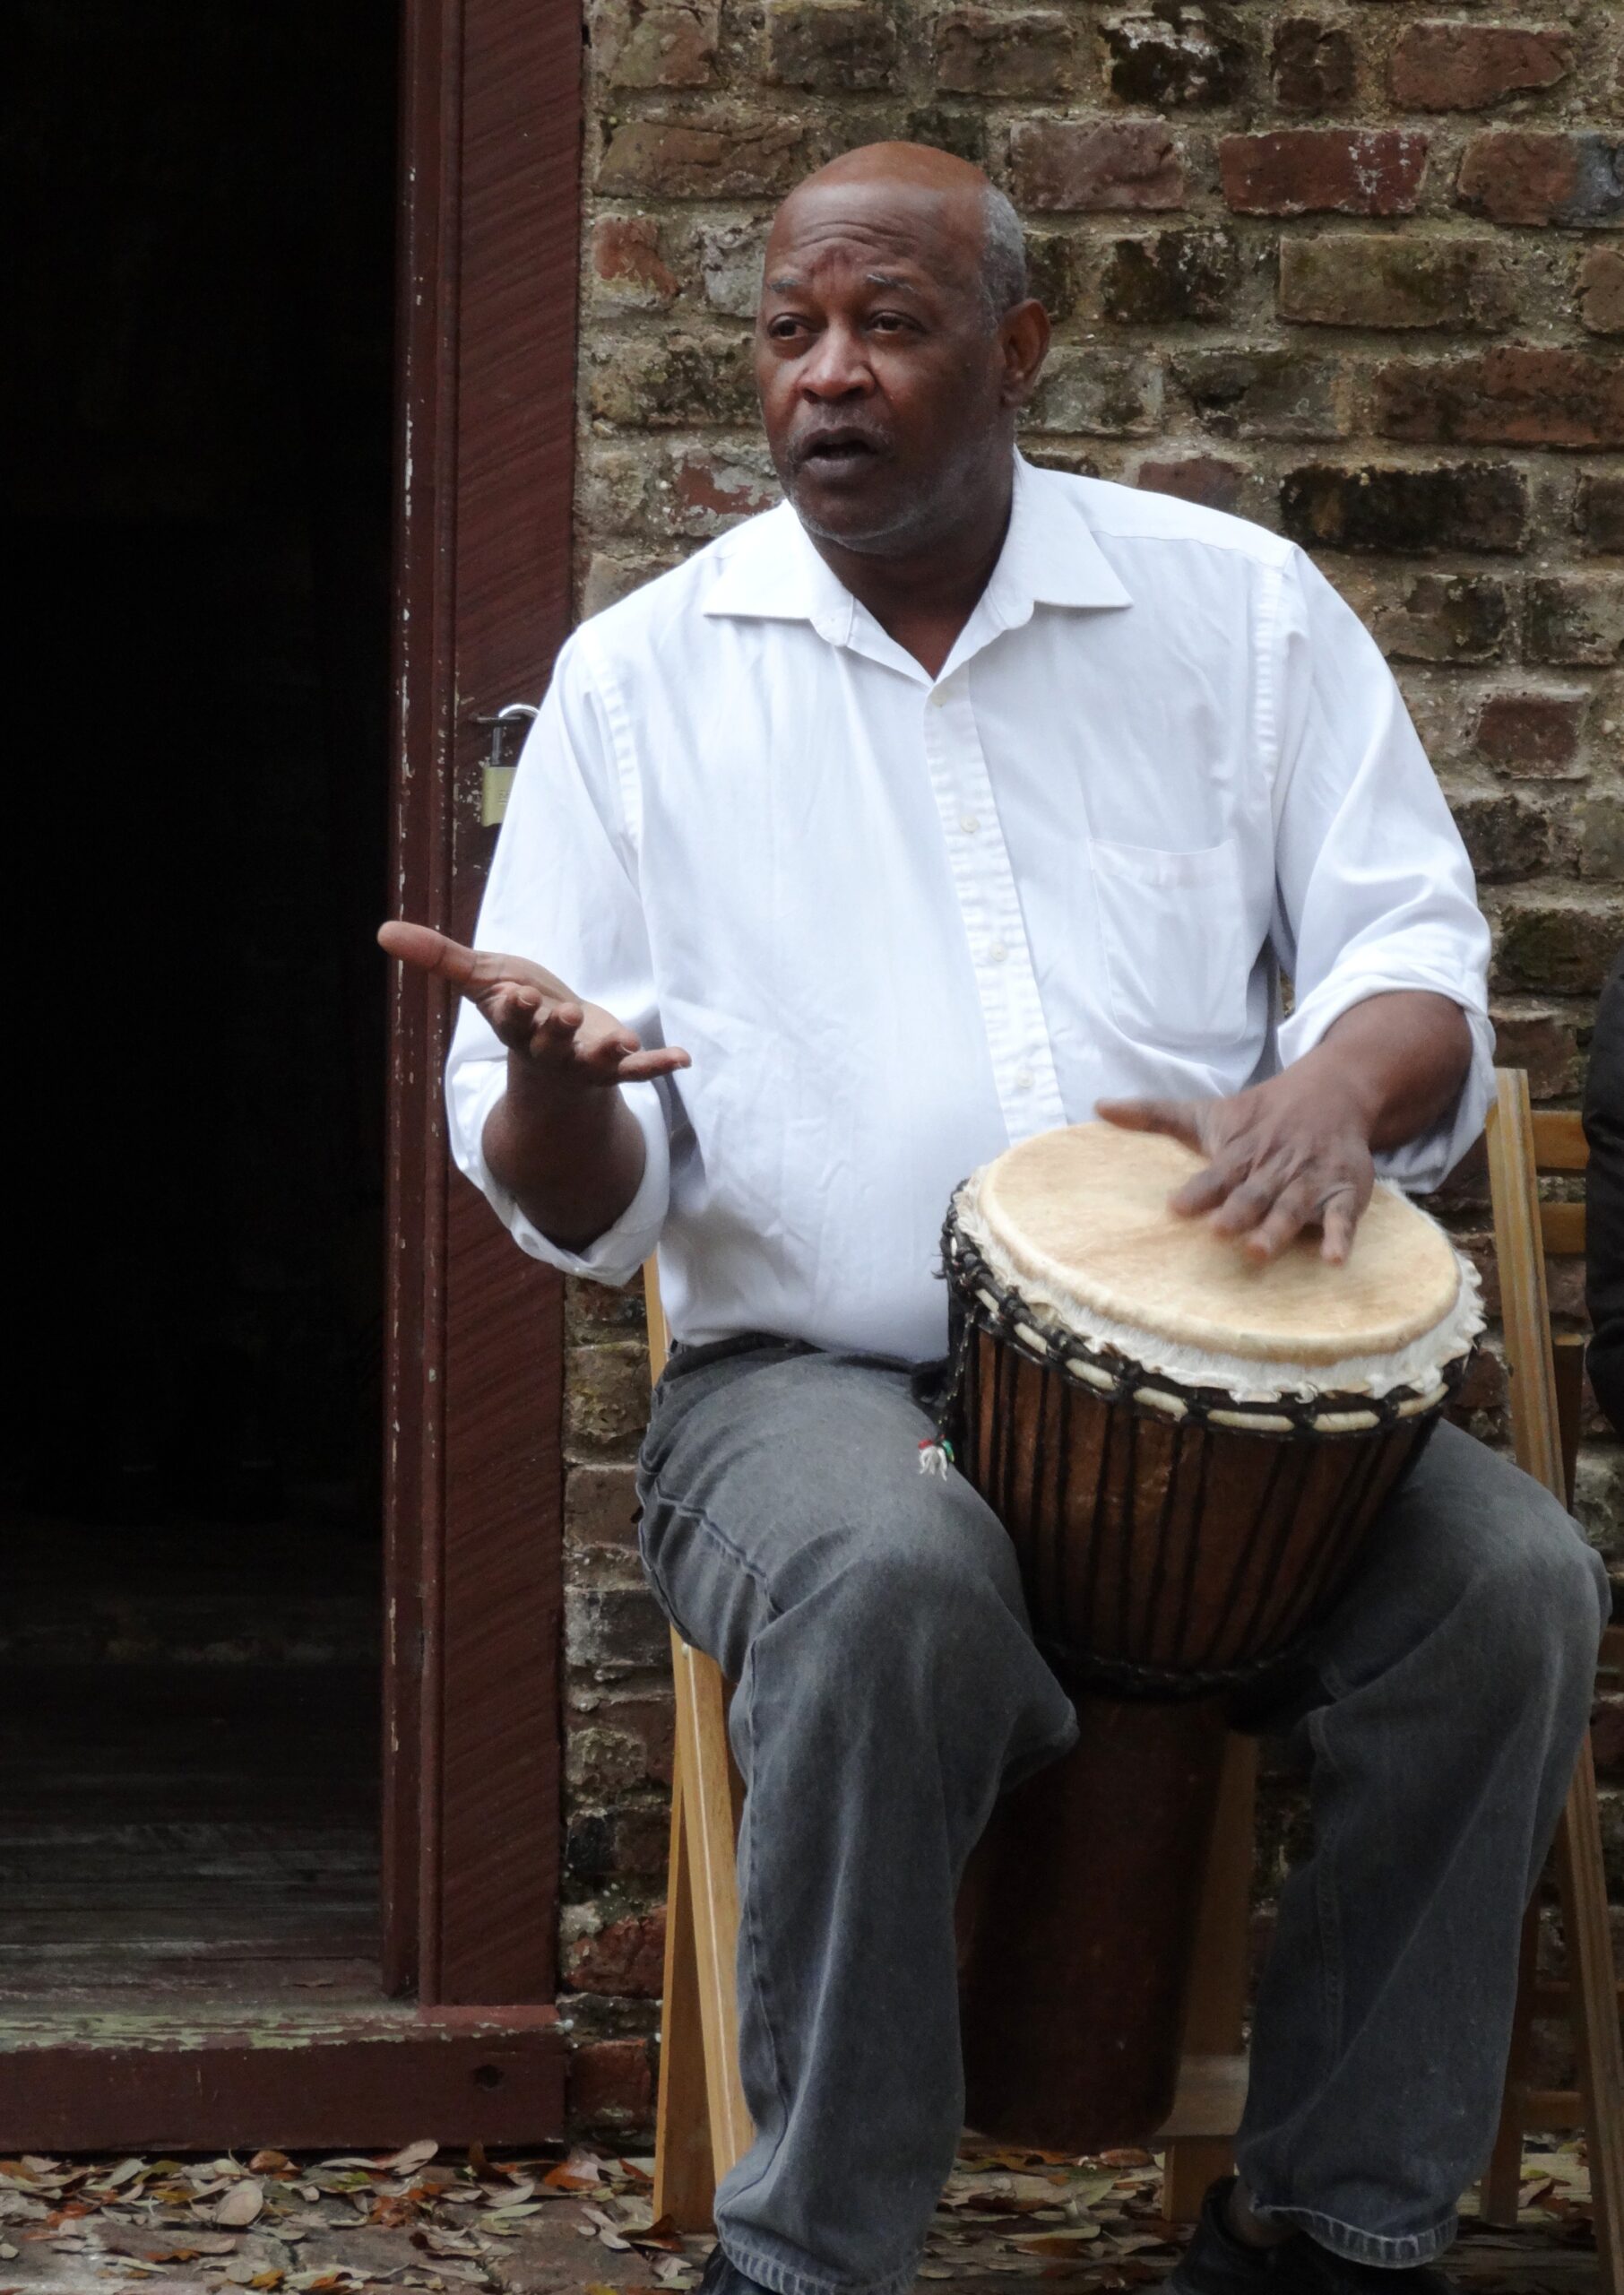 Boone Hall Plantation in Charleston County, South Carolina, offers visitors a Gullah drumming performance. Enslaved ancestors of the Gullah/Geechee brought African cultural traditions in food, art, and music to the Americas. Credit: denisbin/CC BY-ND 2.0.